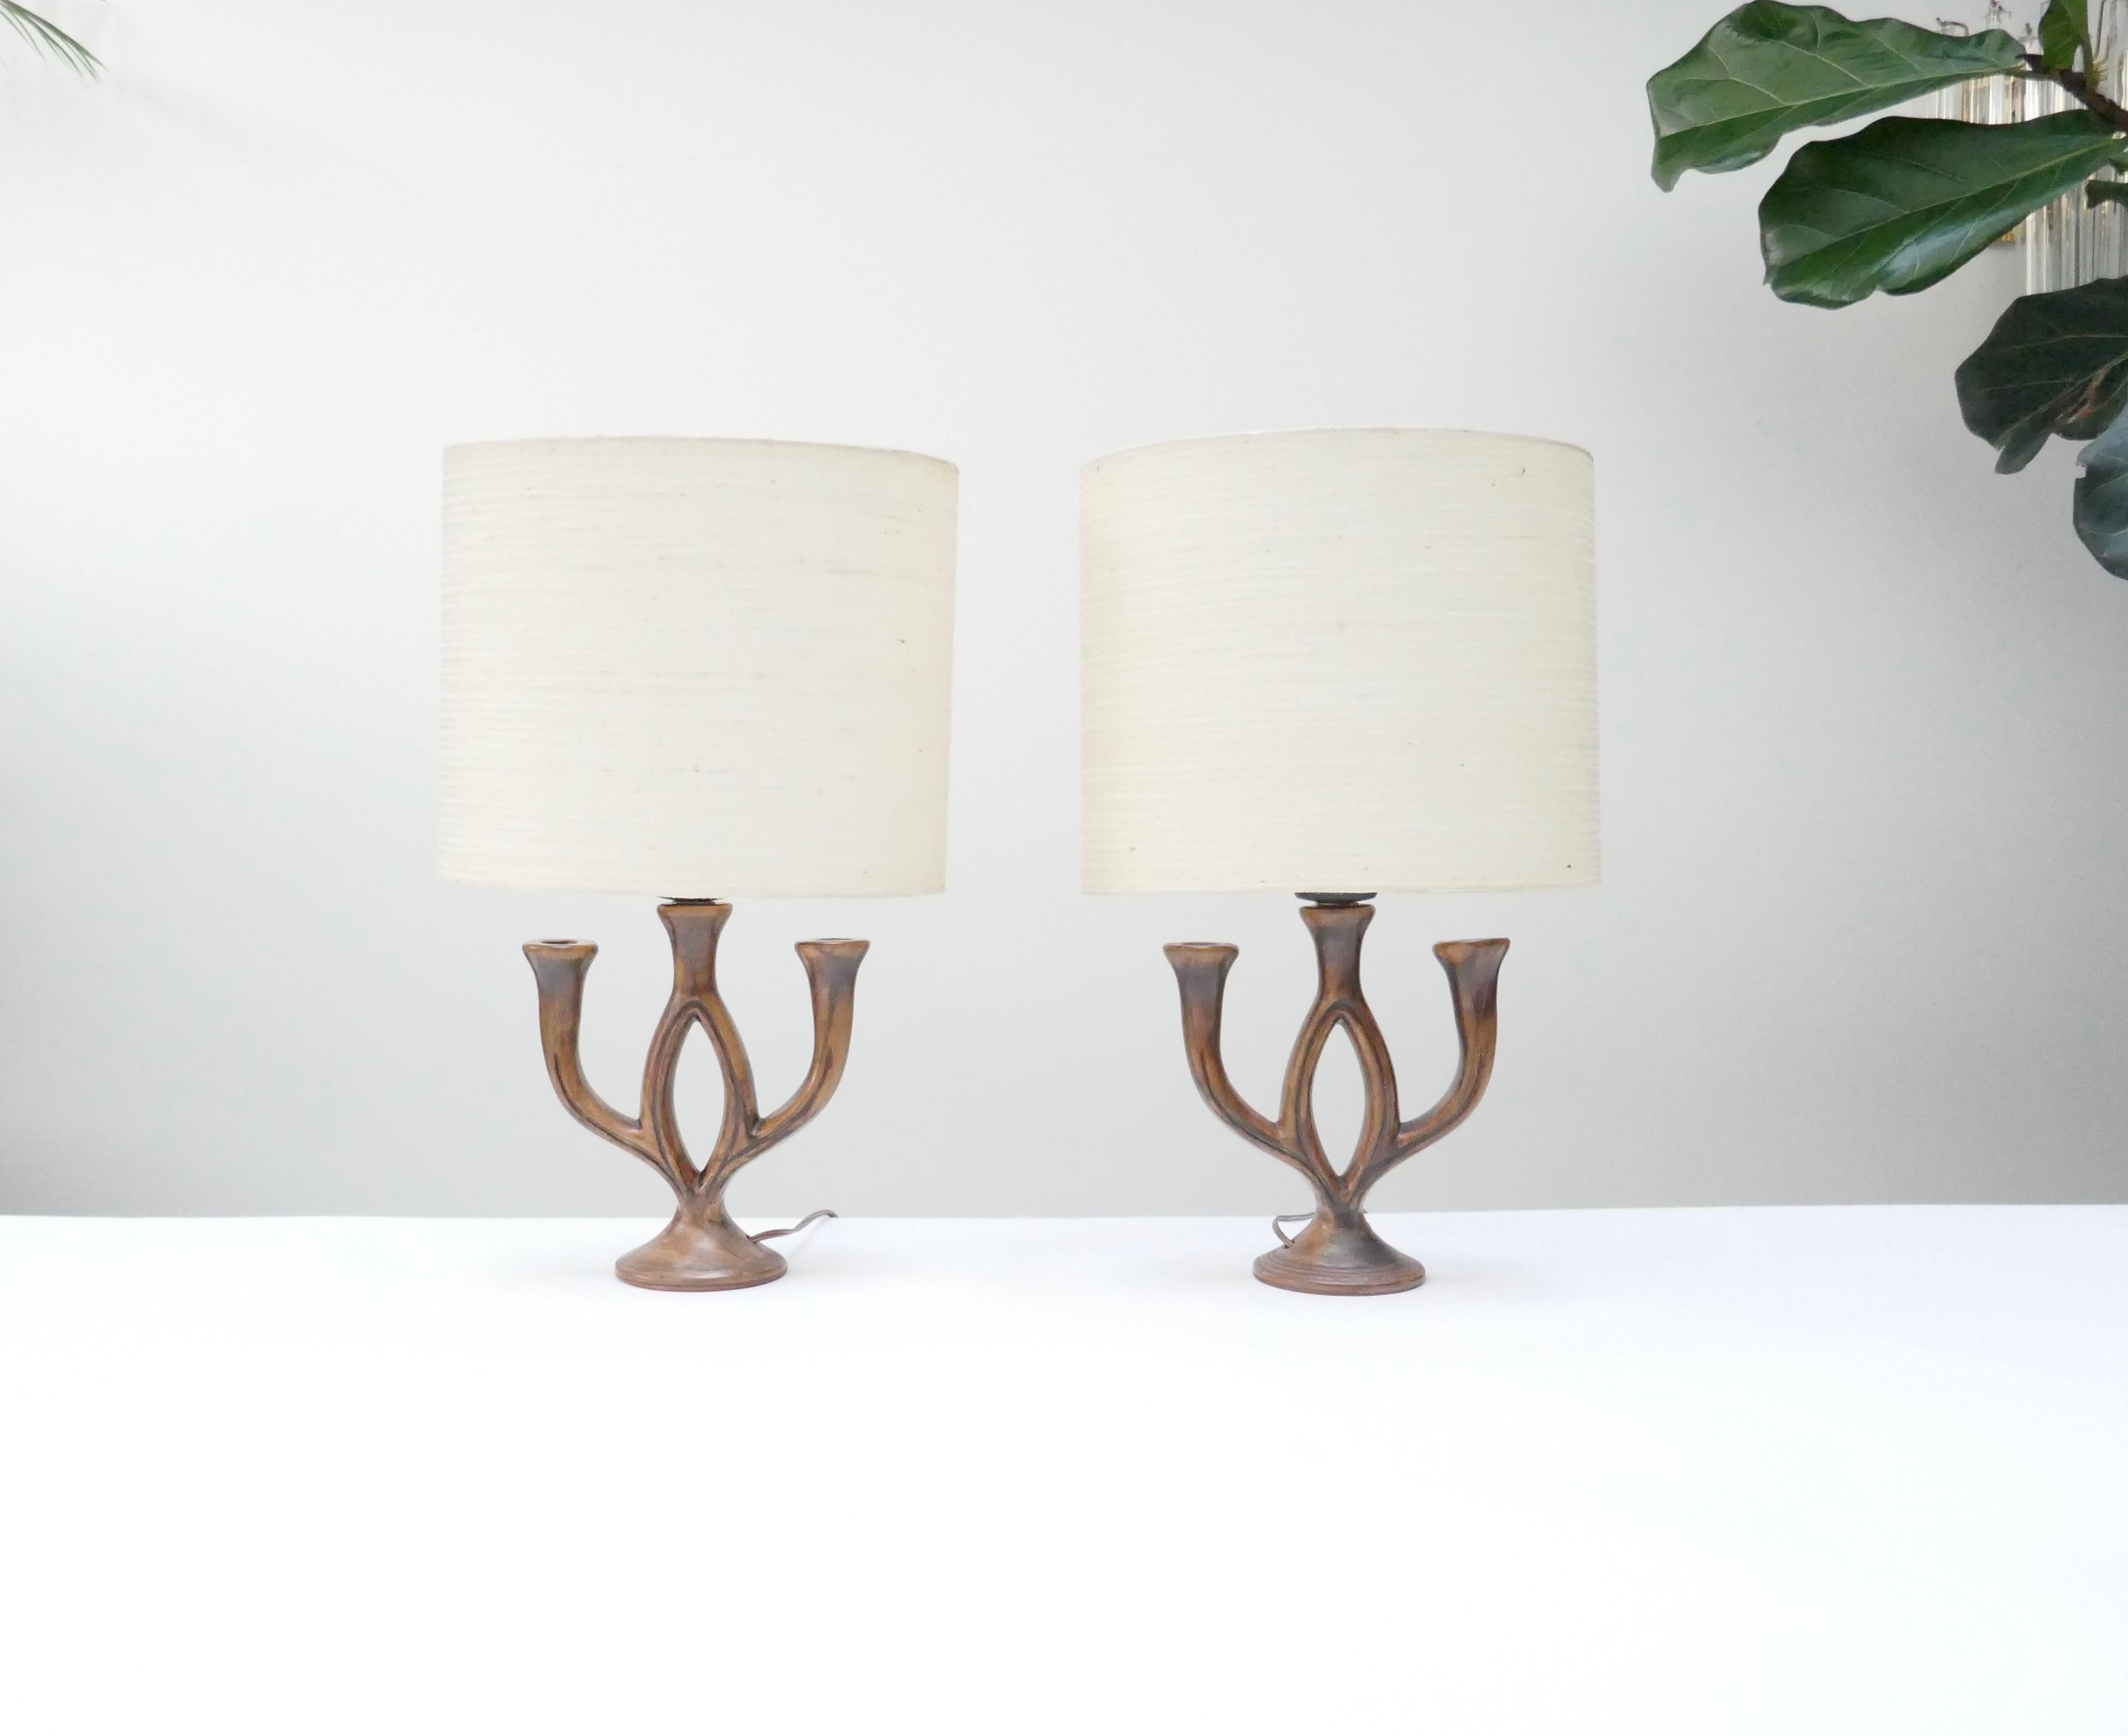 2 well sized brown table lamps in ceramics signed Les Grottes Dieulefit.
Originally candleholders wired as a table lamps. 
They are painted wood like with Matt finish.

They are the work of Poterie Les Grottes in the town of Dieulefit in Drôme,